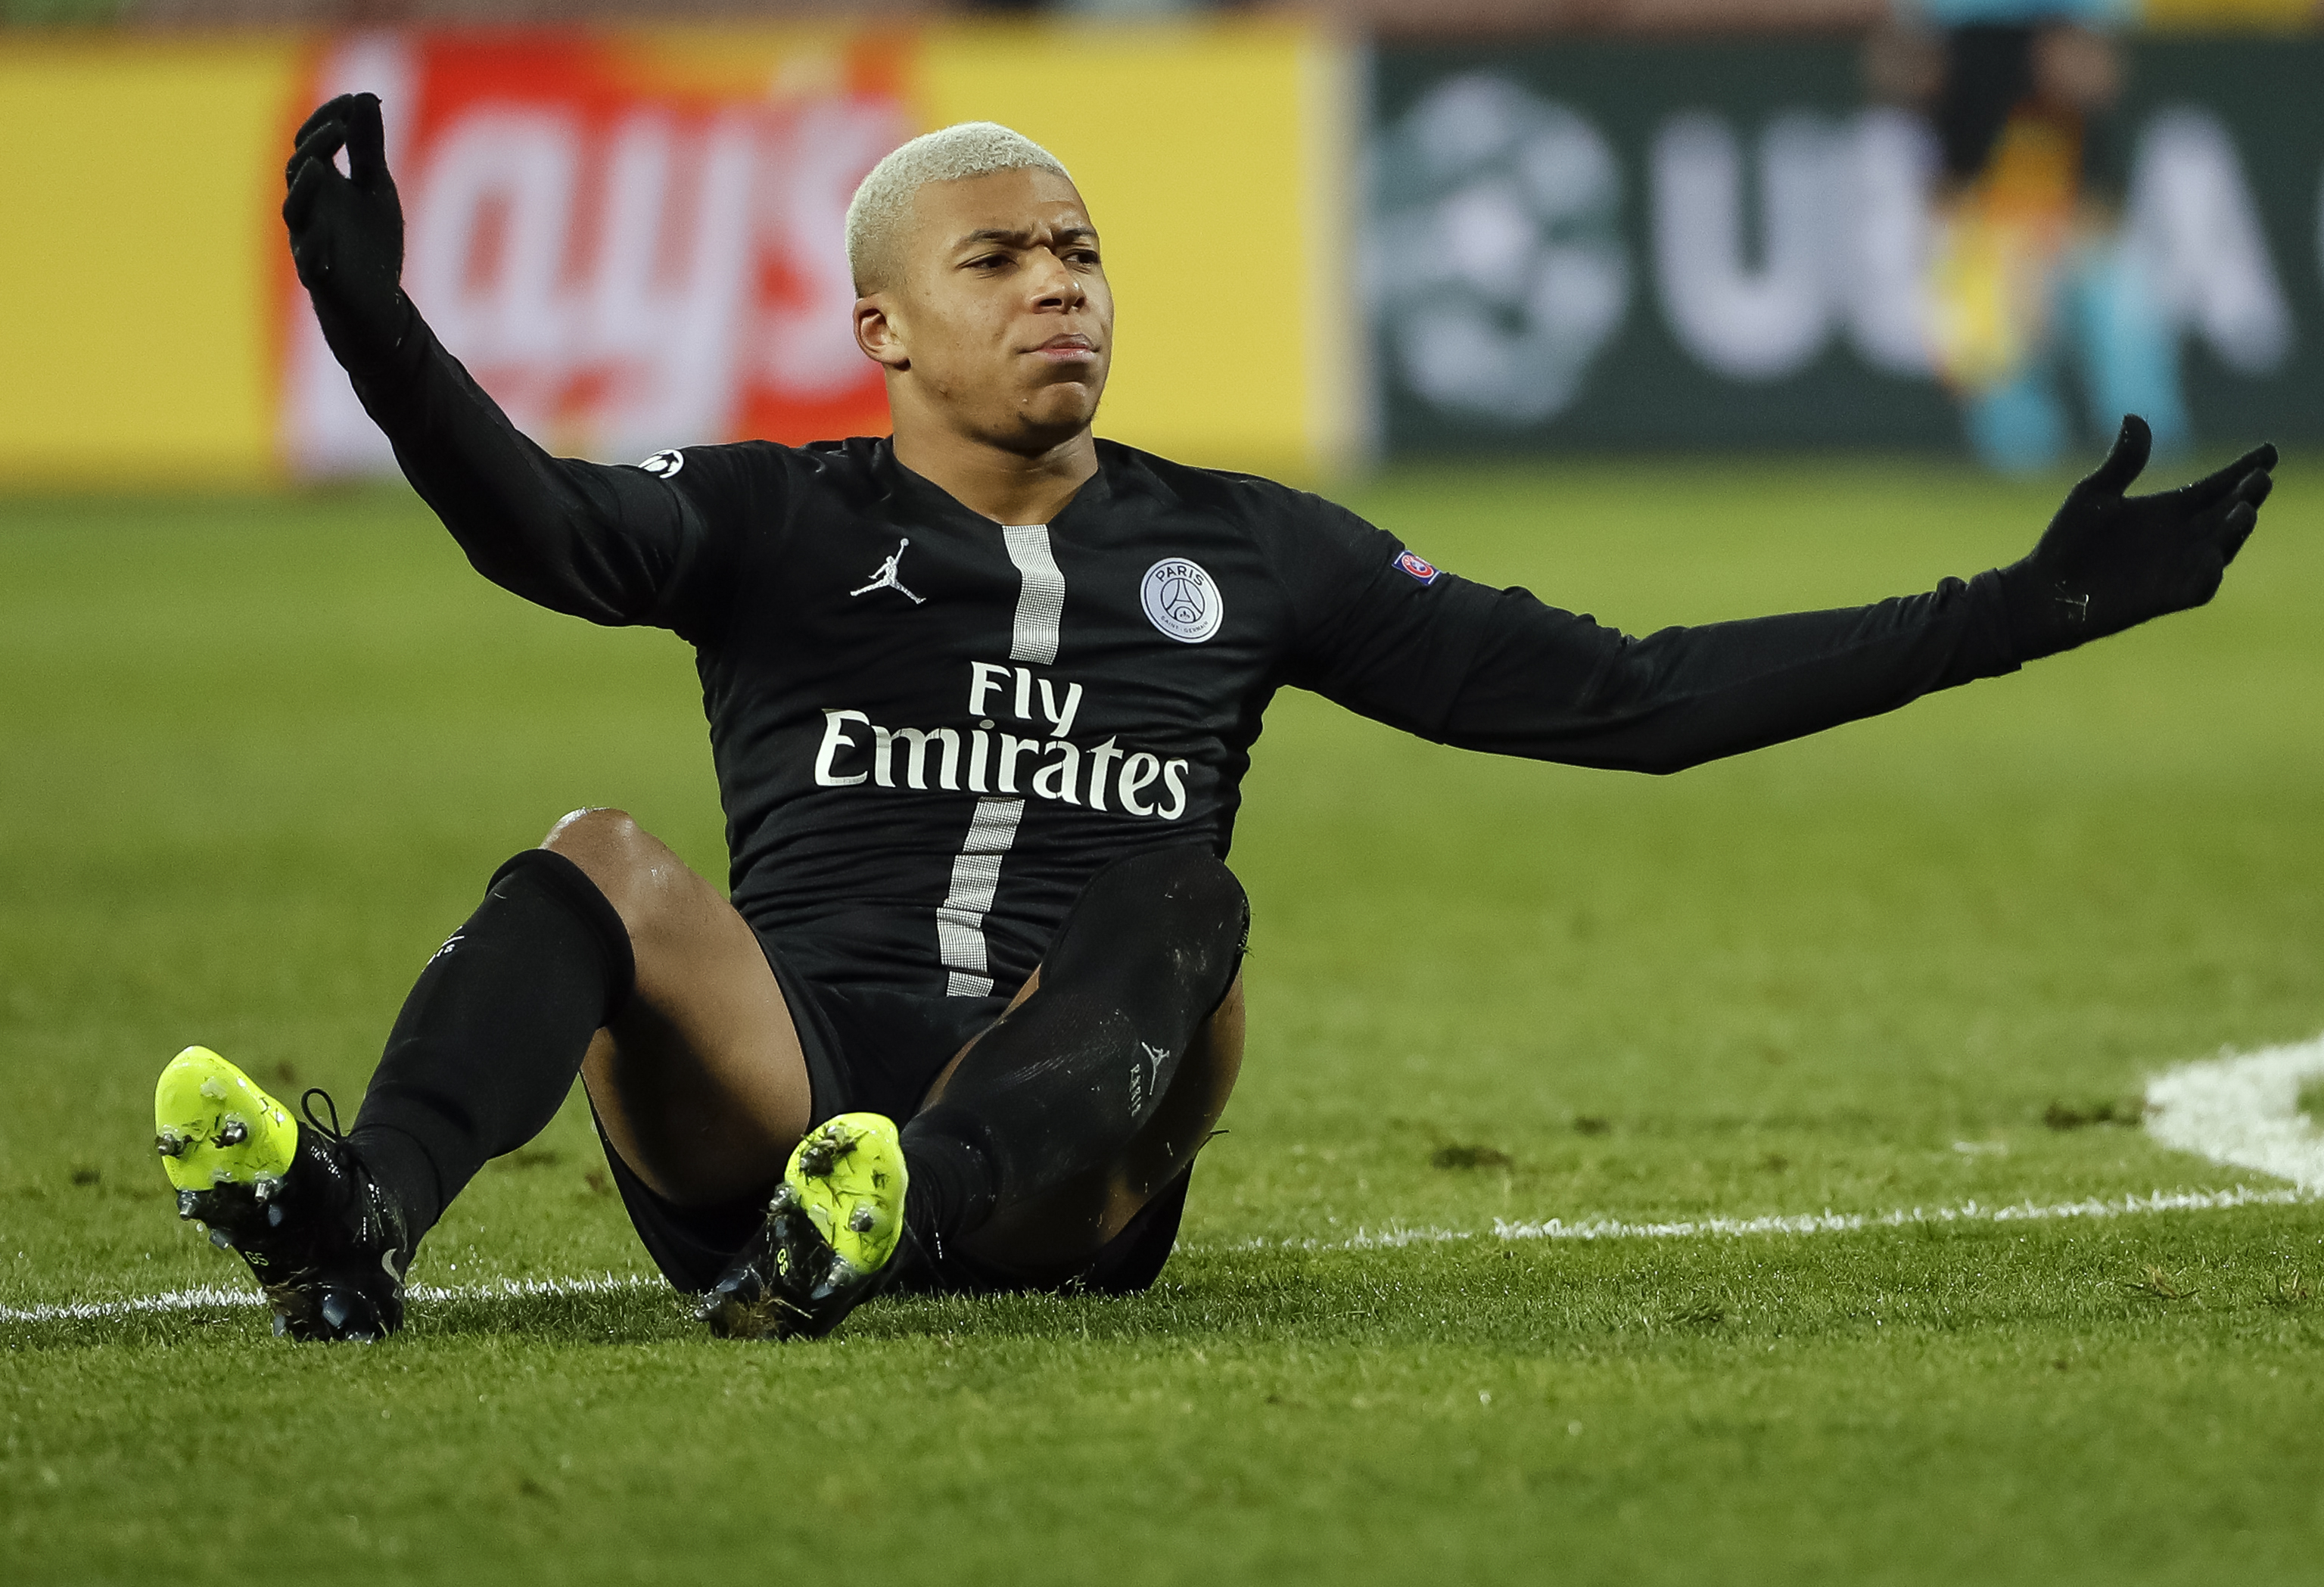 PSG could be forced to sell either Mbappe or Neymar. (Photo by Srdjan Stevanovic/Getty Images)